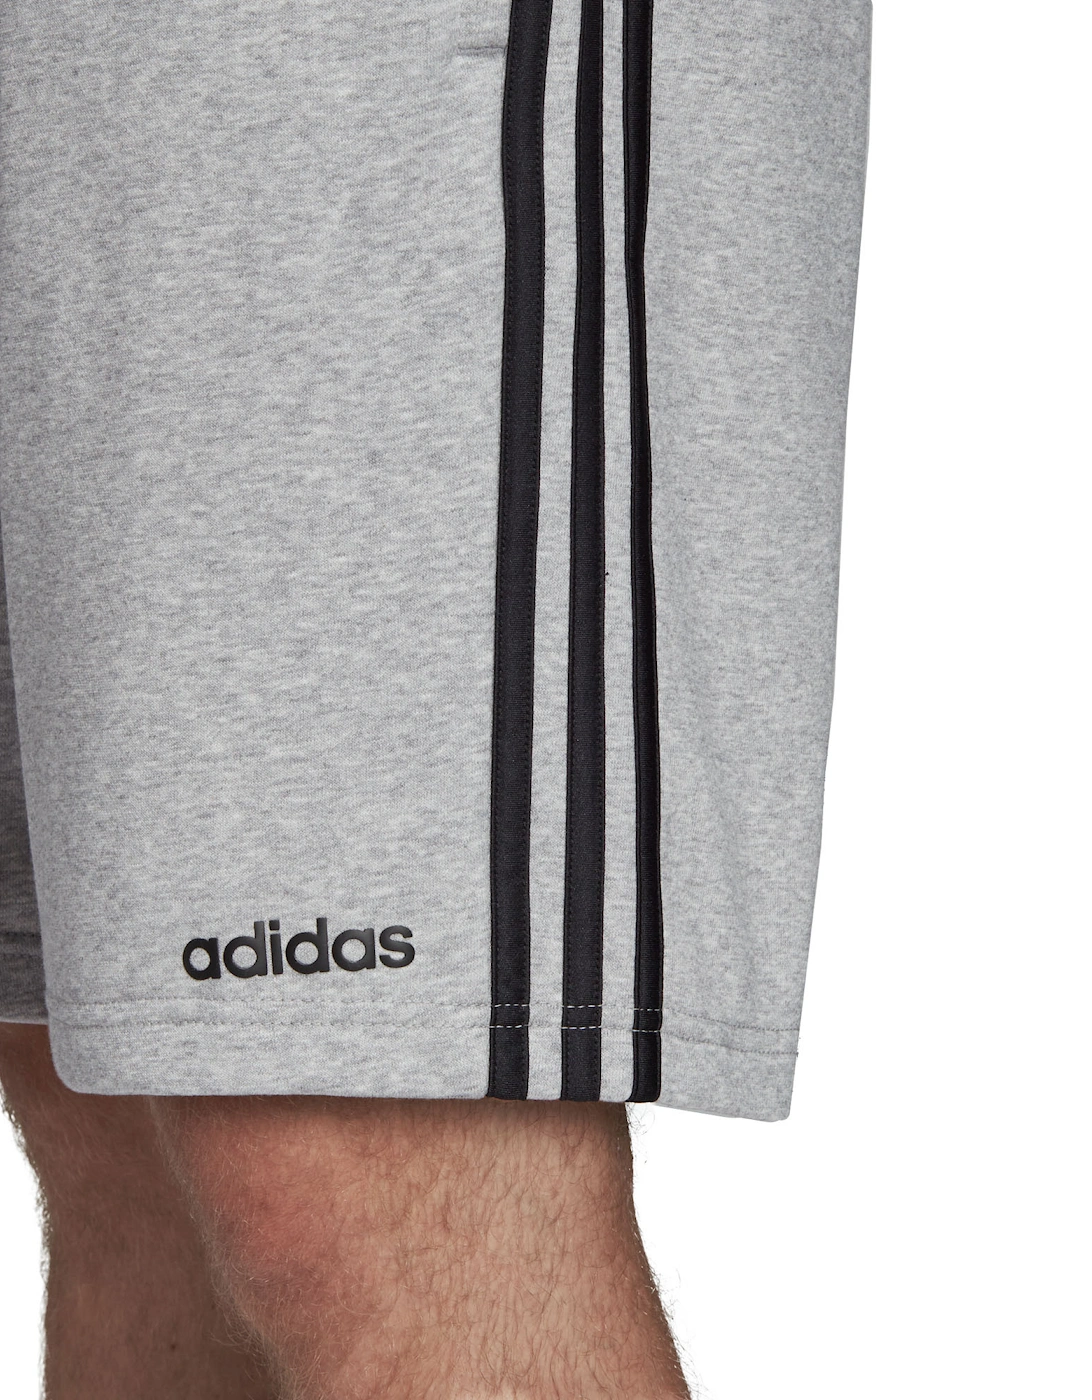 Mens Essentials 3 Stripes French Terry Shorts (Grey)